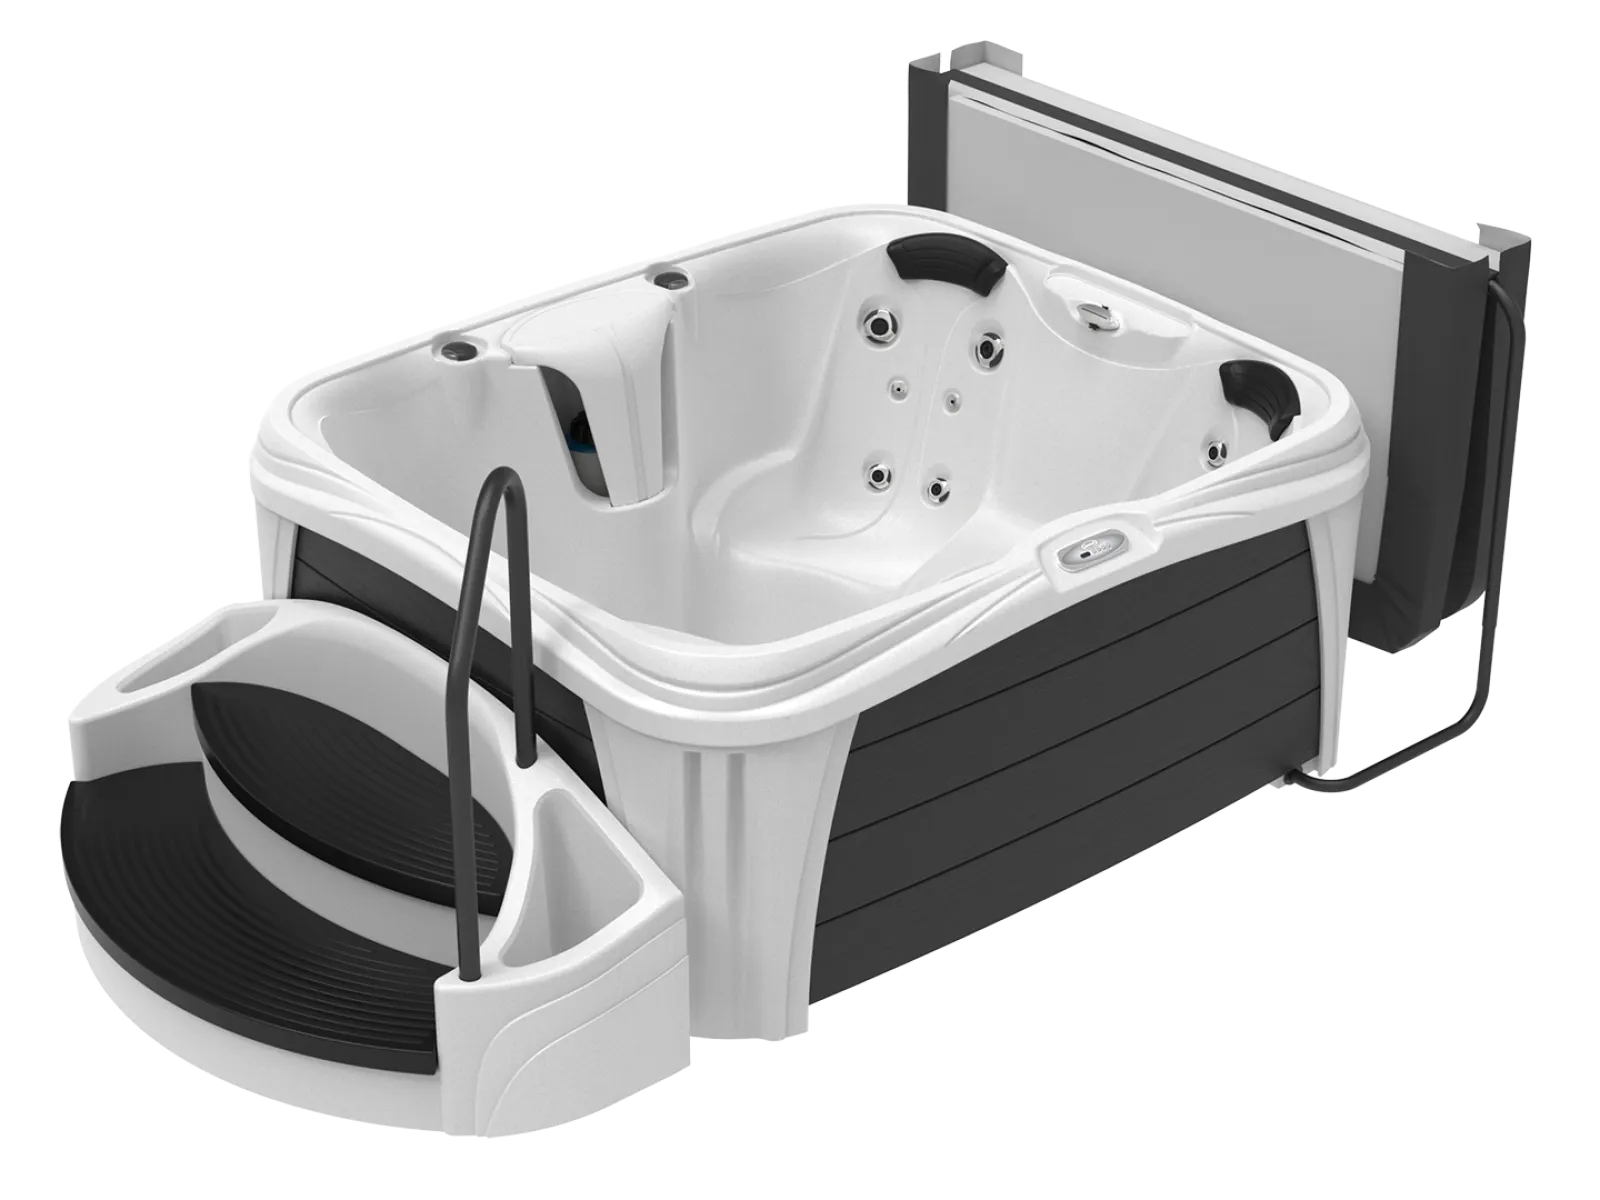 Jacuzzi Play Mood hot tub with suite package